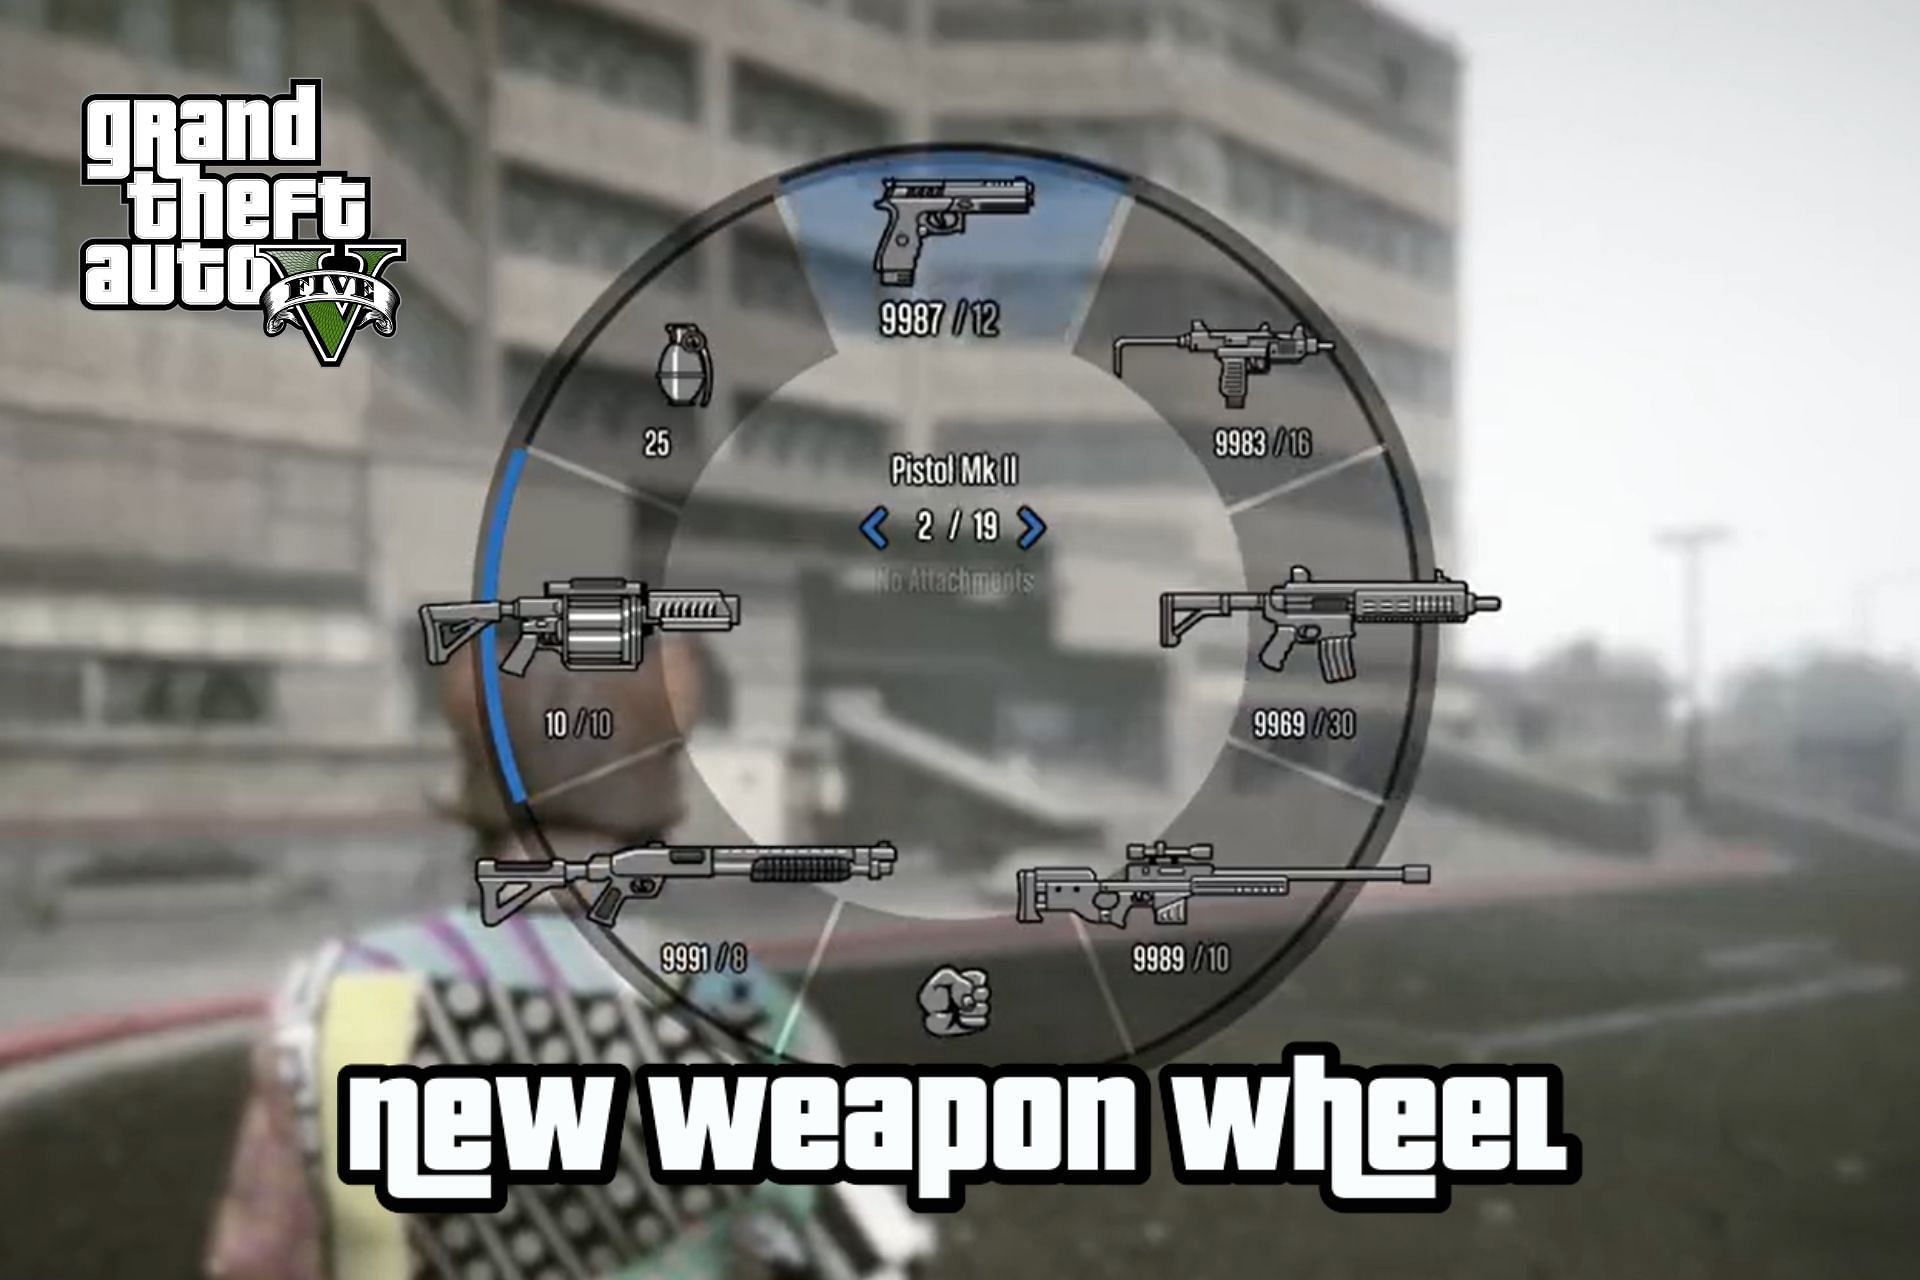 GTA 5 Expanded and Enhanced Edition was supposed to include a new weapon wheel (Image via Twitter/@LucasIsPersonal)